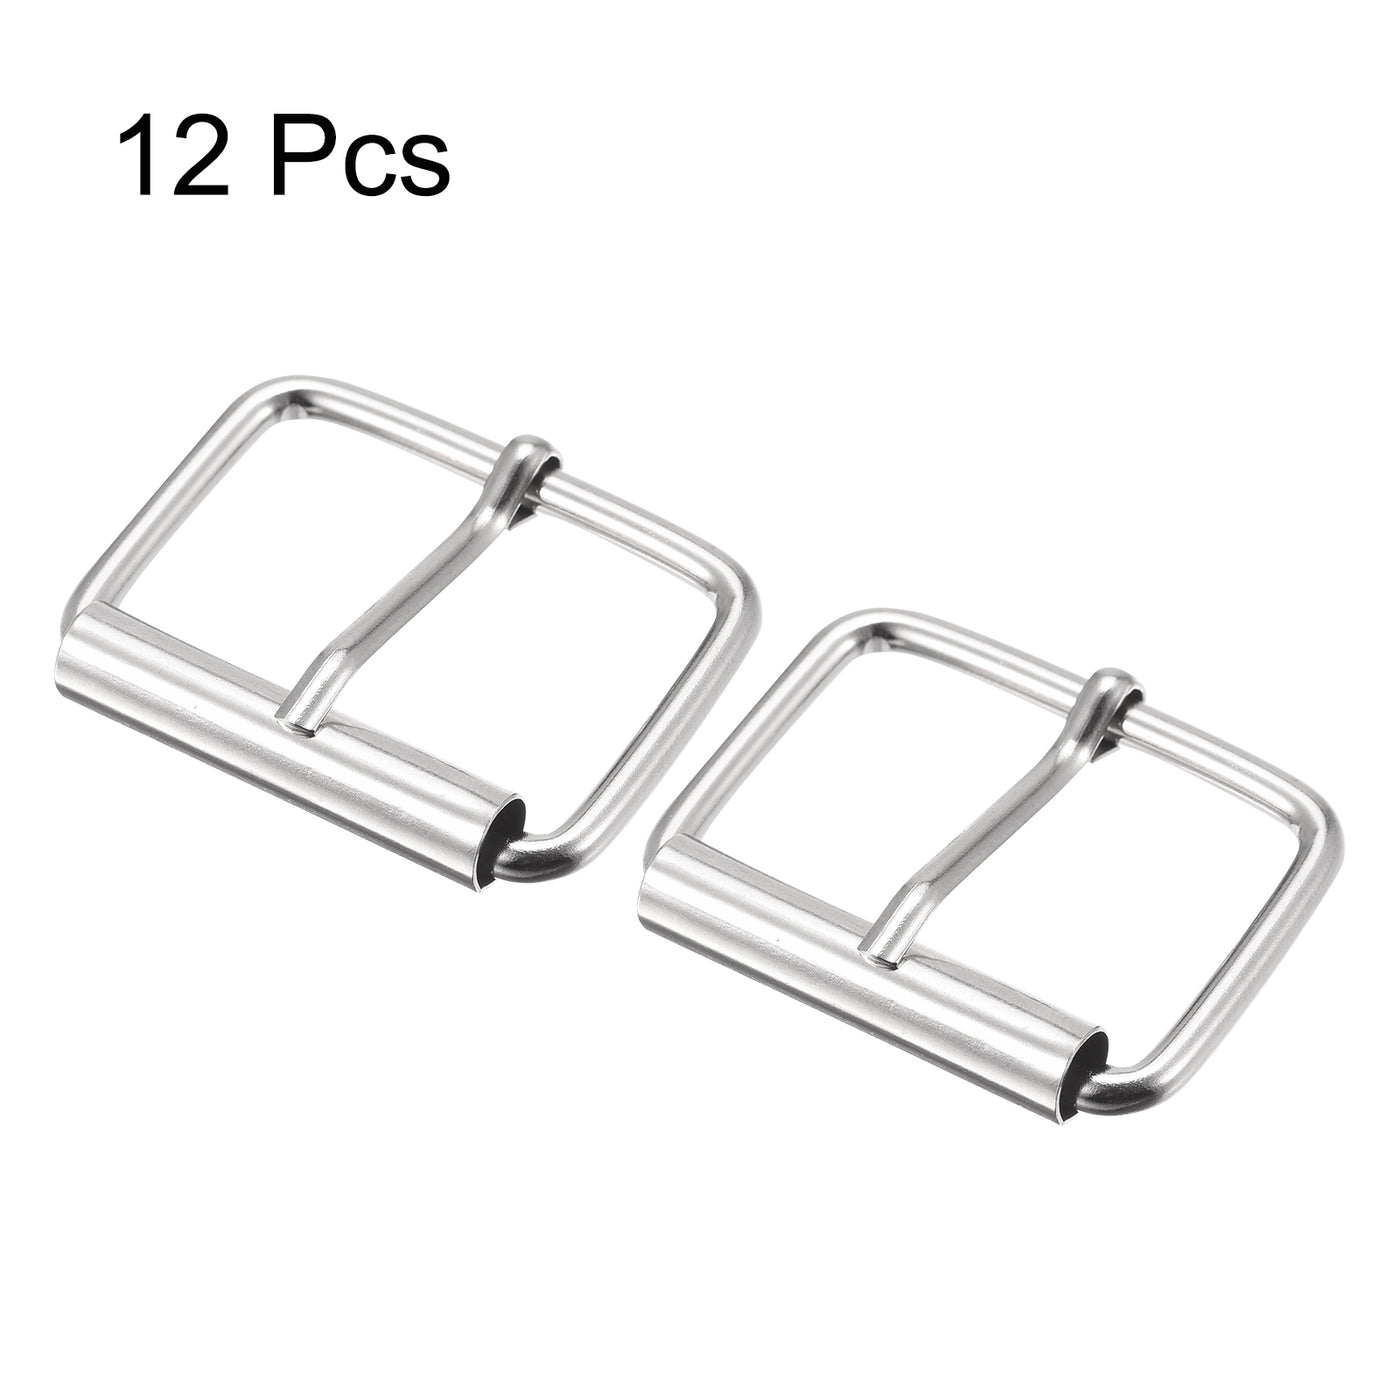 uxcell Uxcell 30mm(1.18") Metal Roller Buckles for Belts Bags Straps DIY Silver Tone 12pcs